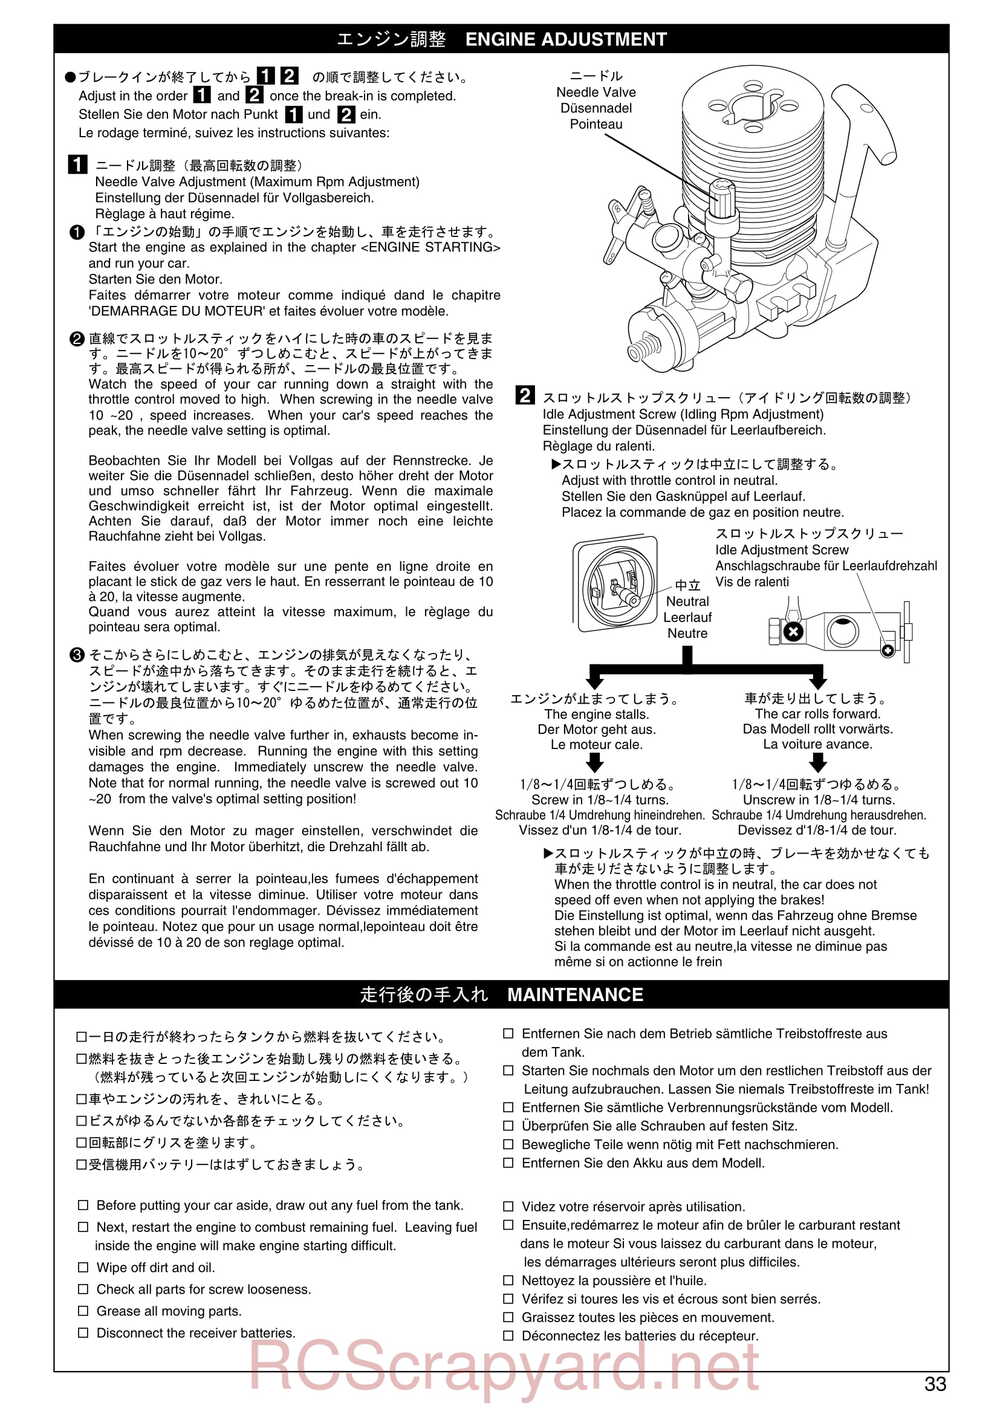 Kyosho - 31241 - V-One-S - Manual - Page 33